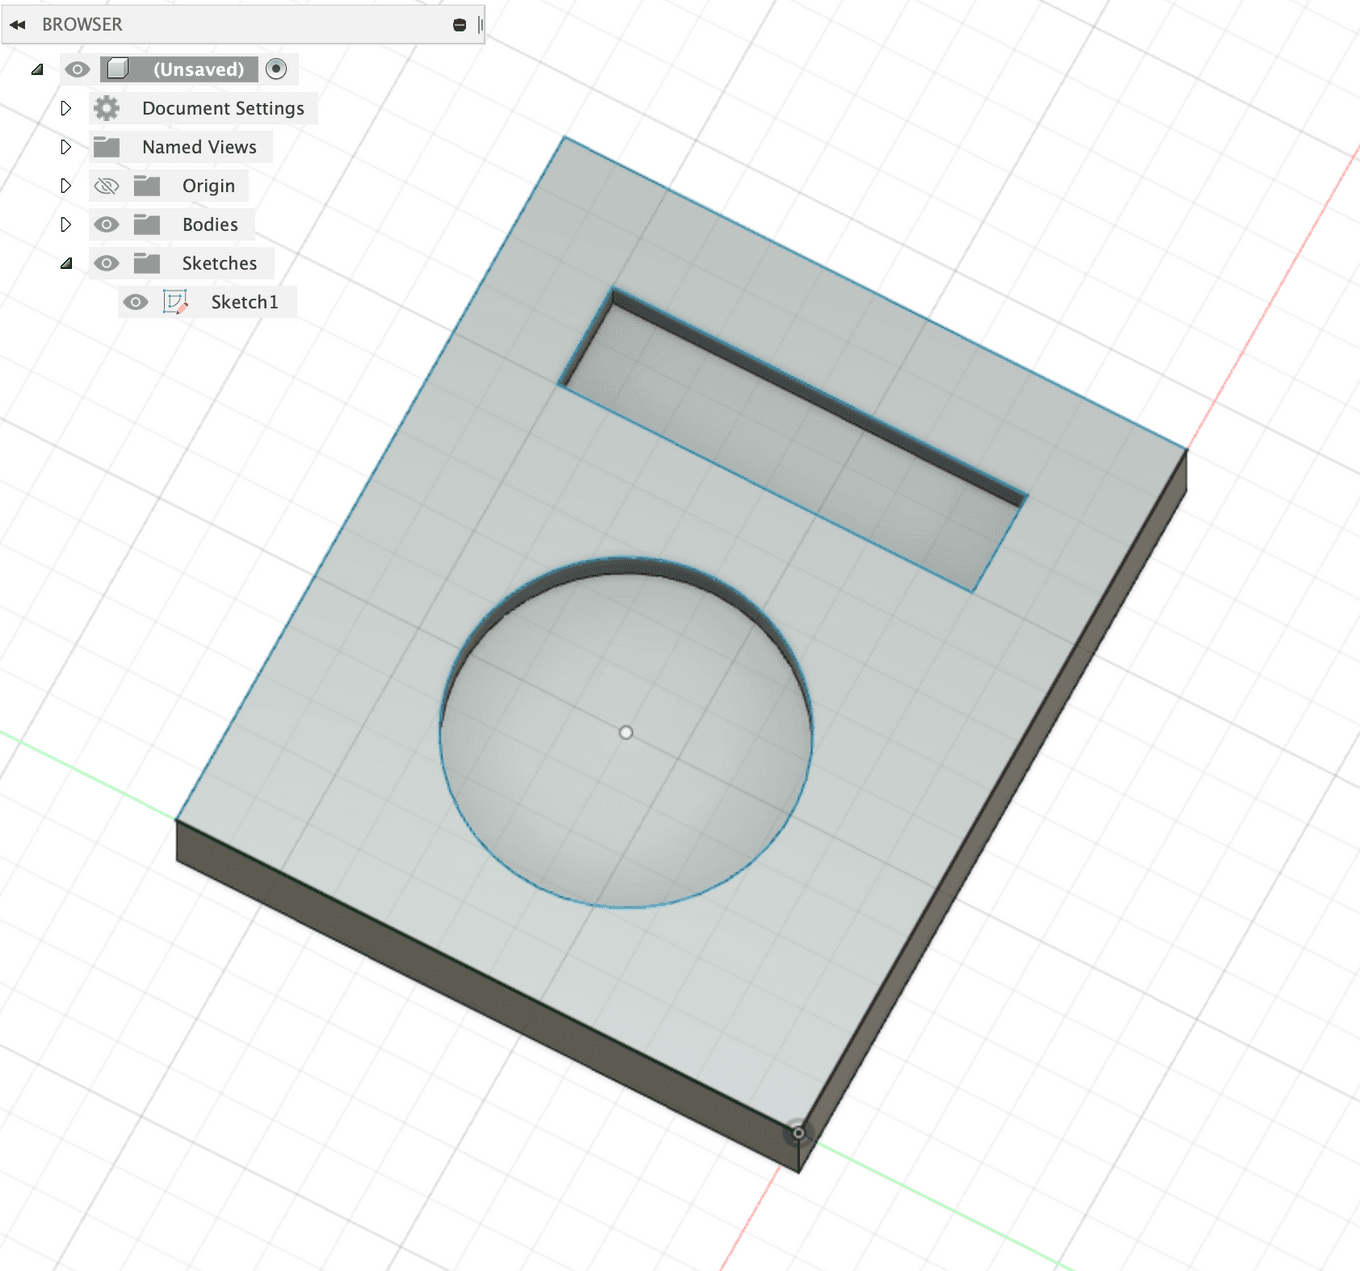 View of a CAD model in Fusion360, a rectangular box with engraved circle and rectangle